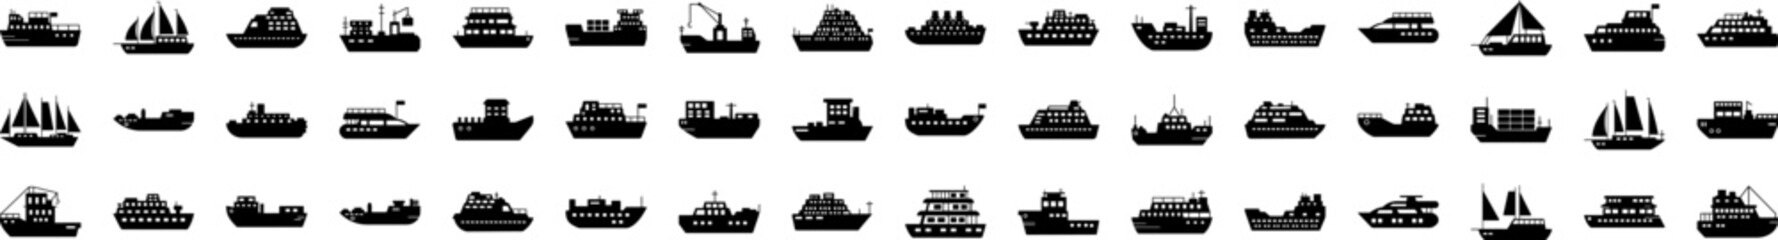 Water transport icons collection vector illustration design